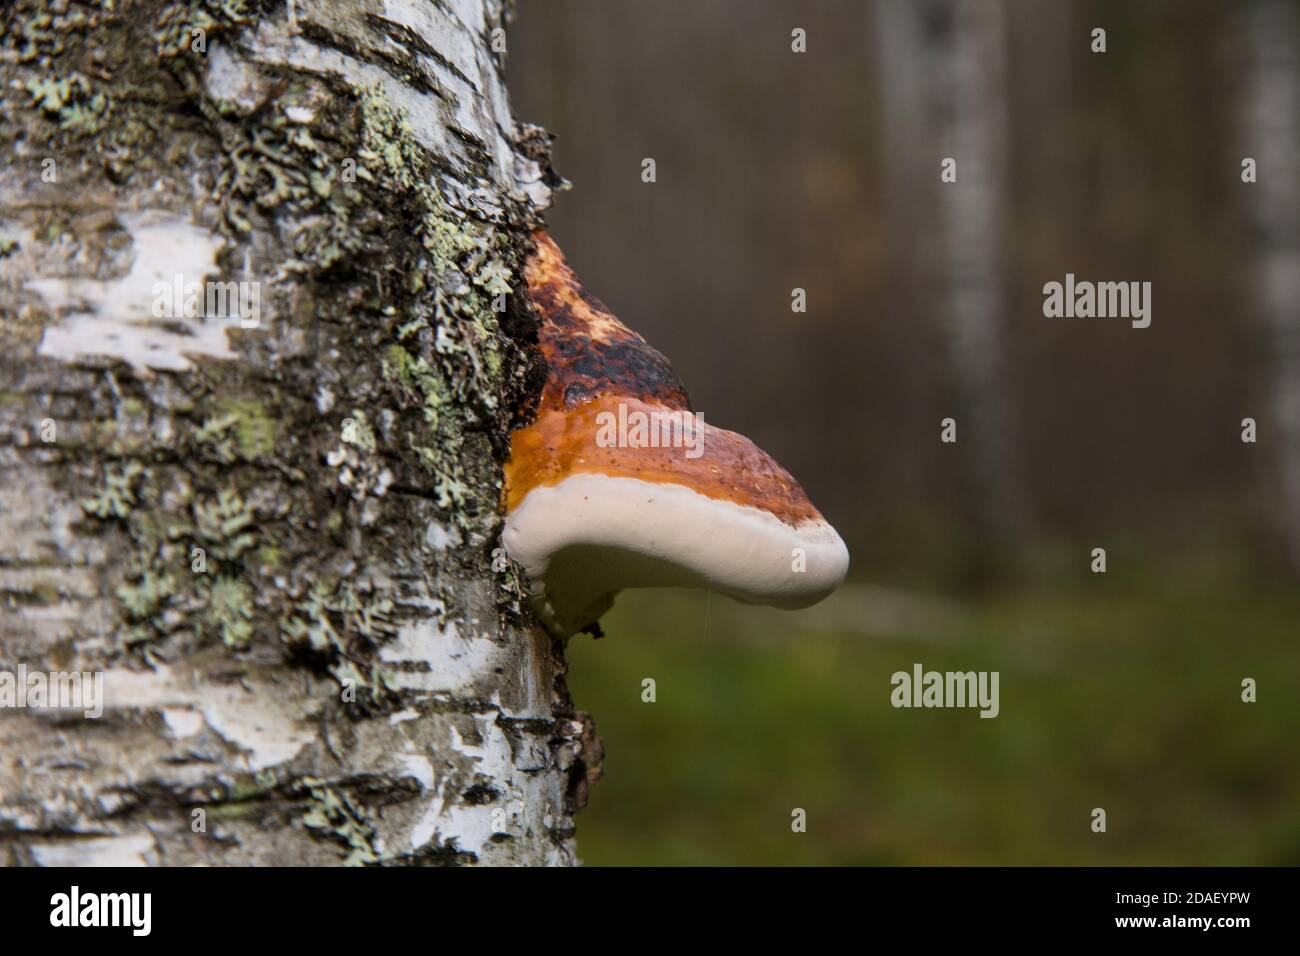 polyporus one over the other mushroom specific species on a dead tree trunk Stock Photo